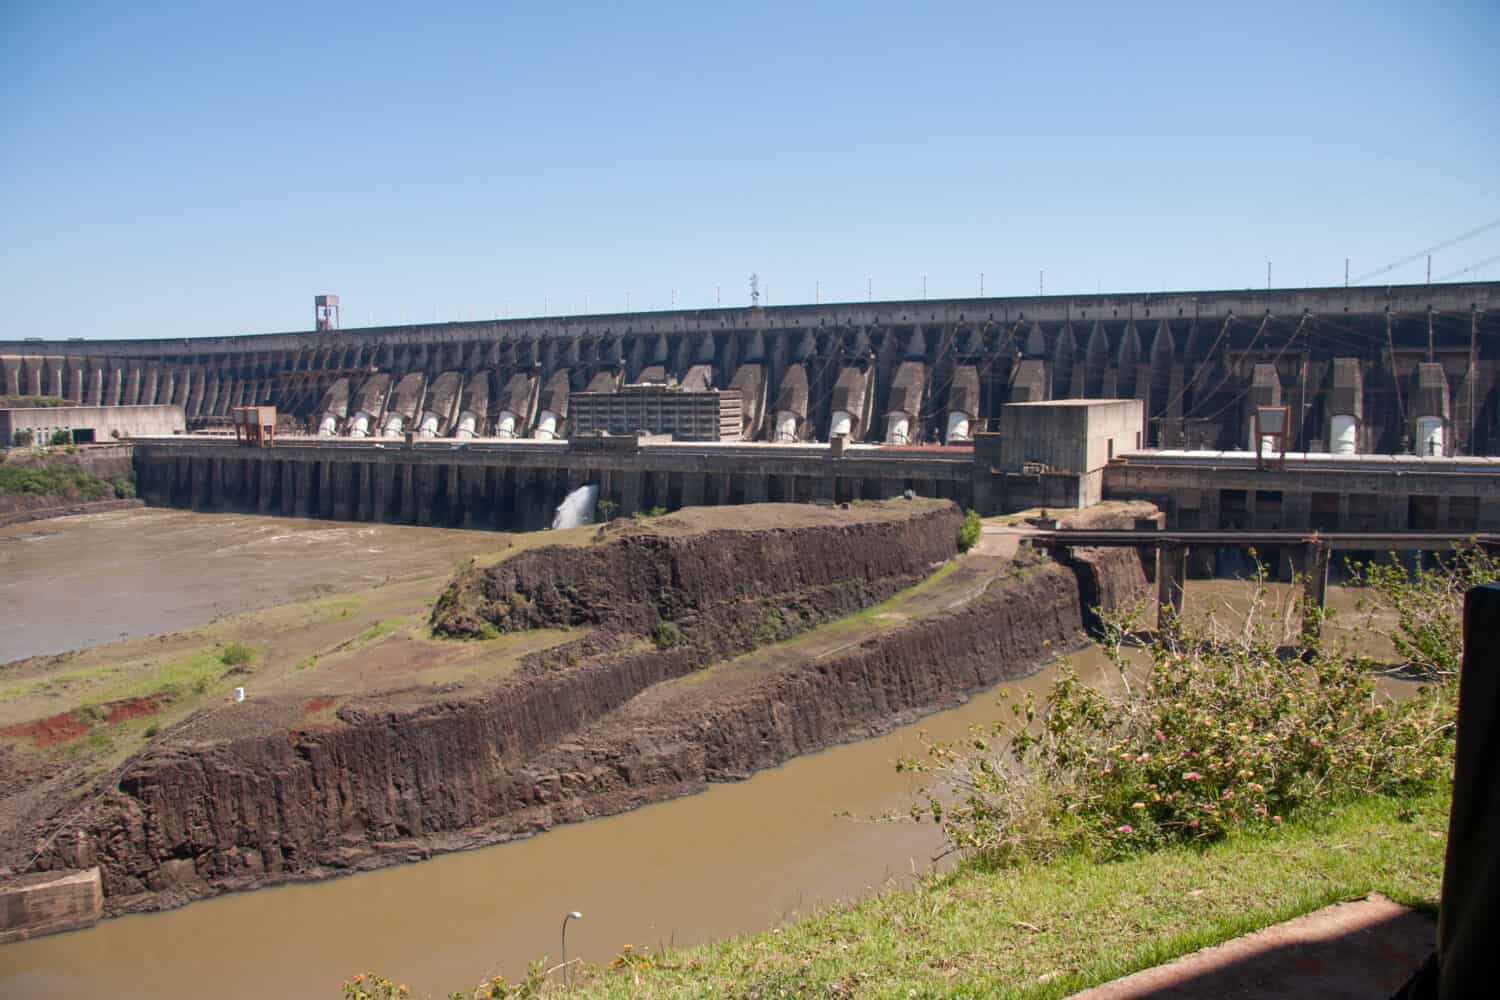 The Itaipu Dam on the Parana River located on the Border of Brazil and Paraguay